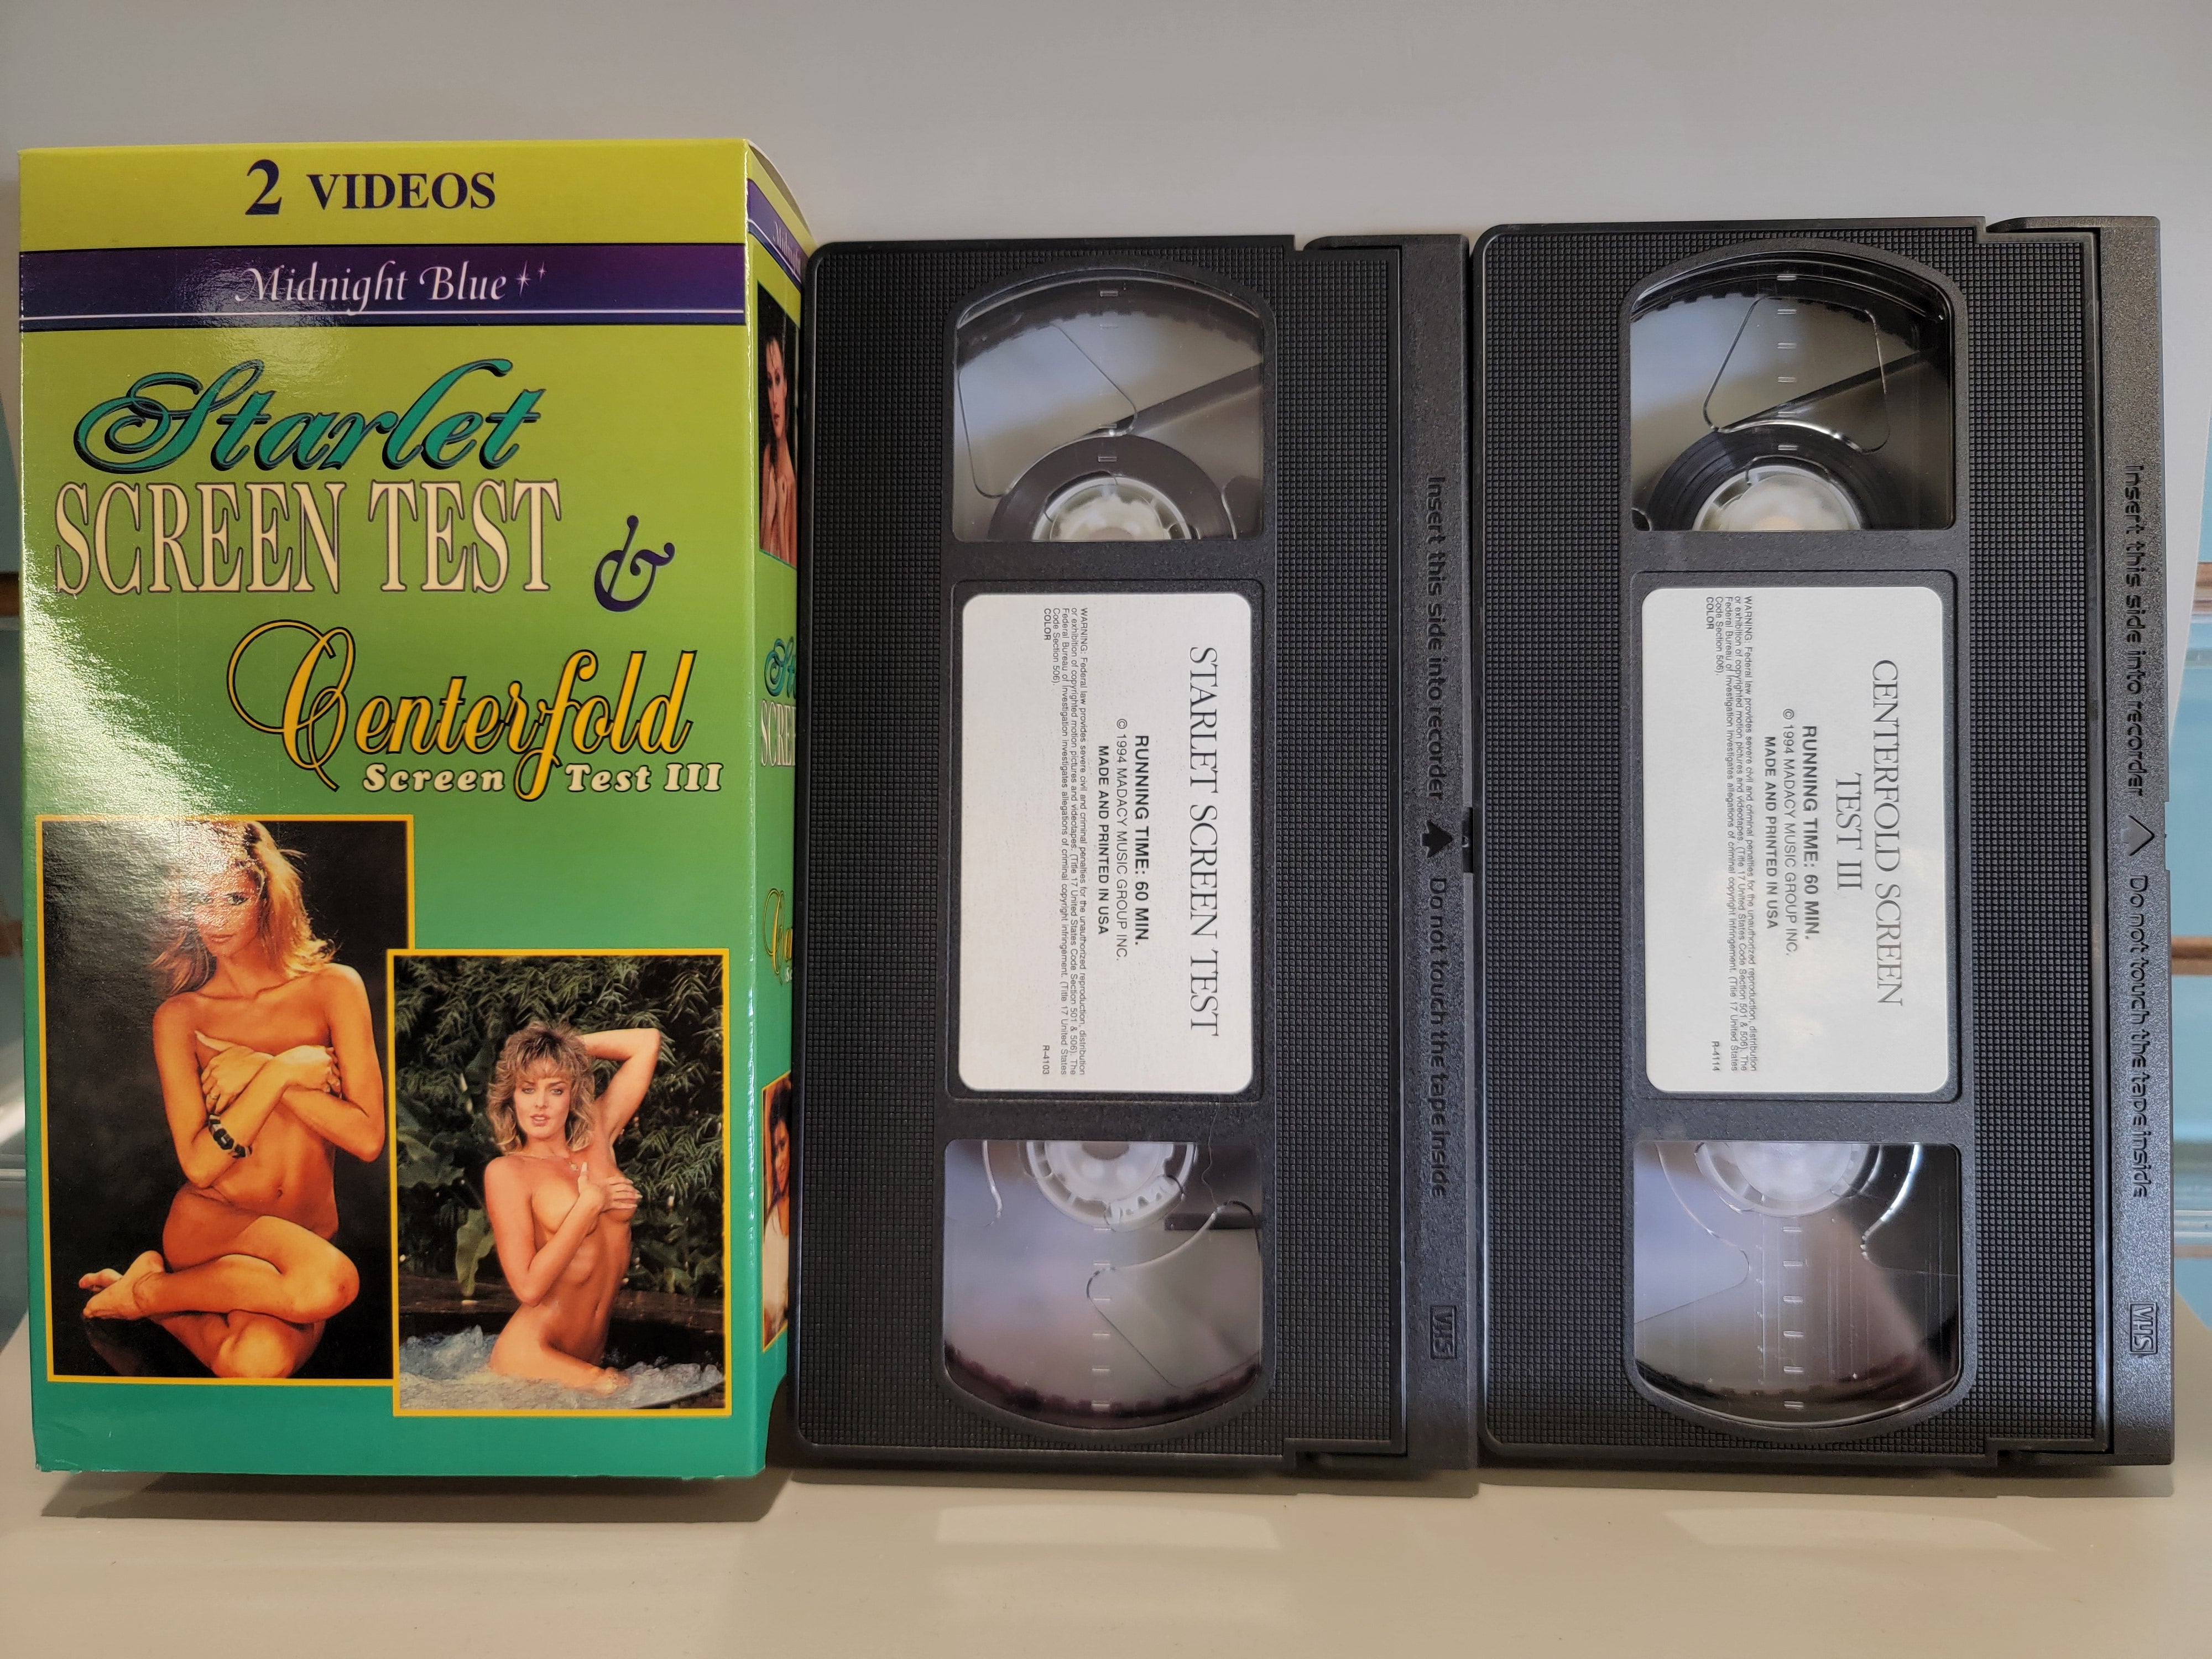 STARLET SCREEN TEST / CENTERFOLD SCREEN TEST III VHS [USED]